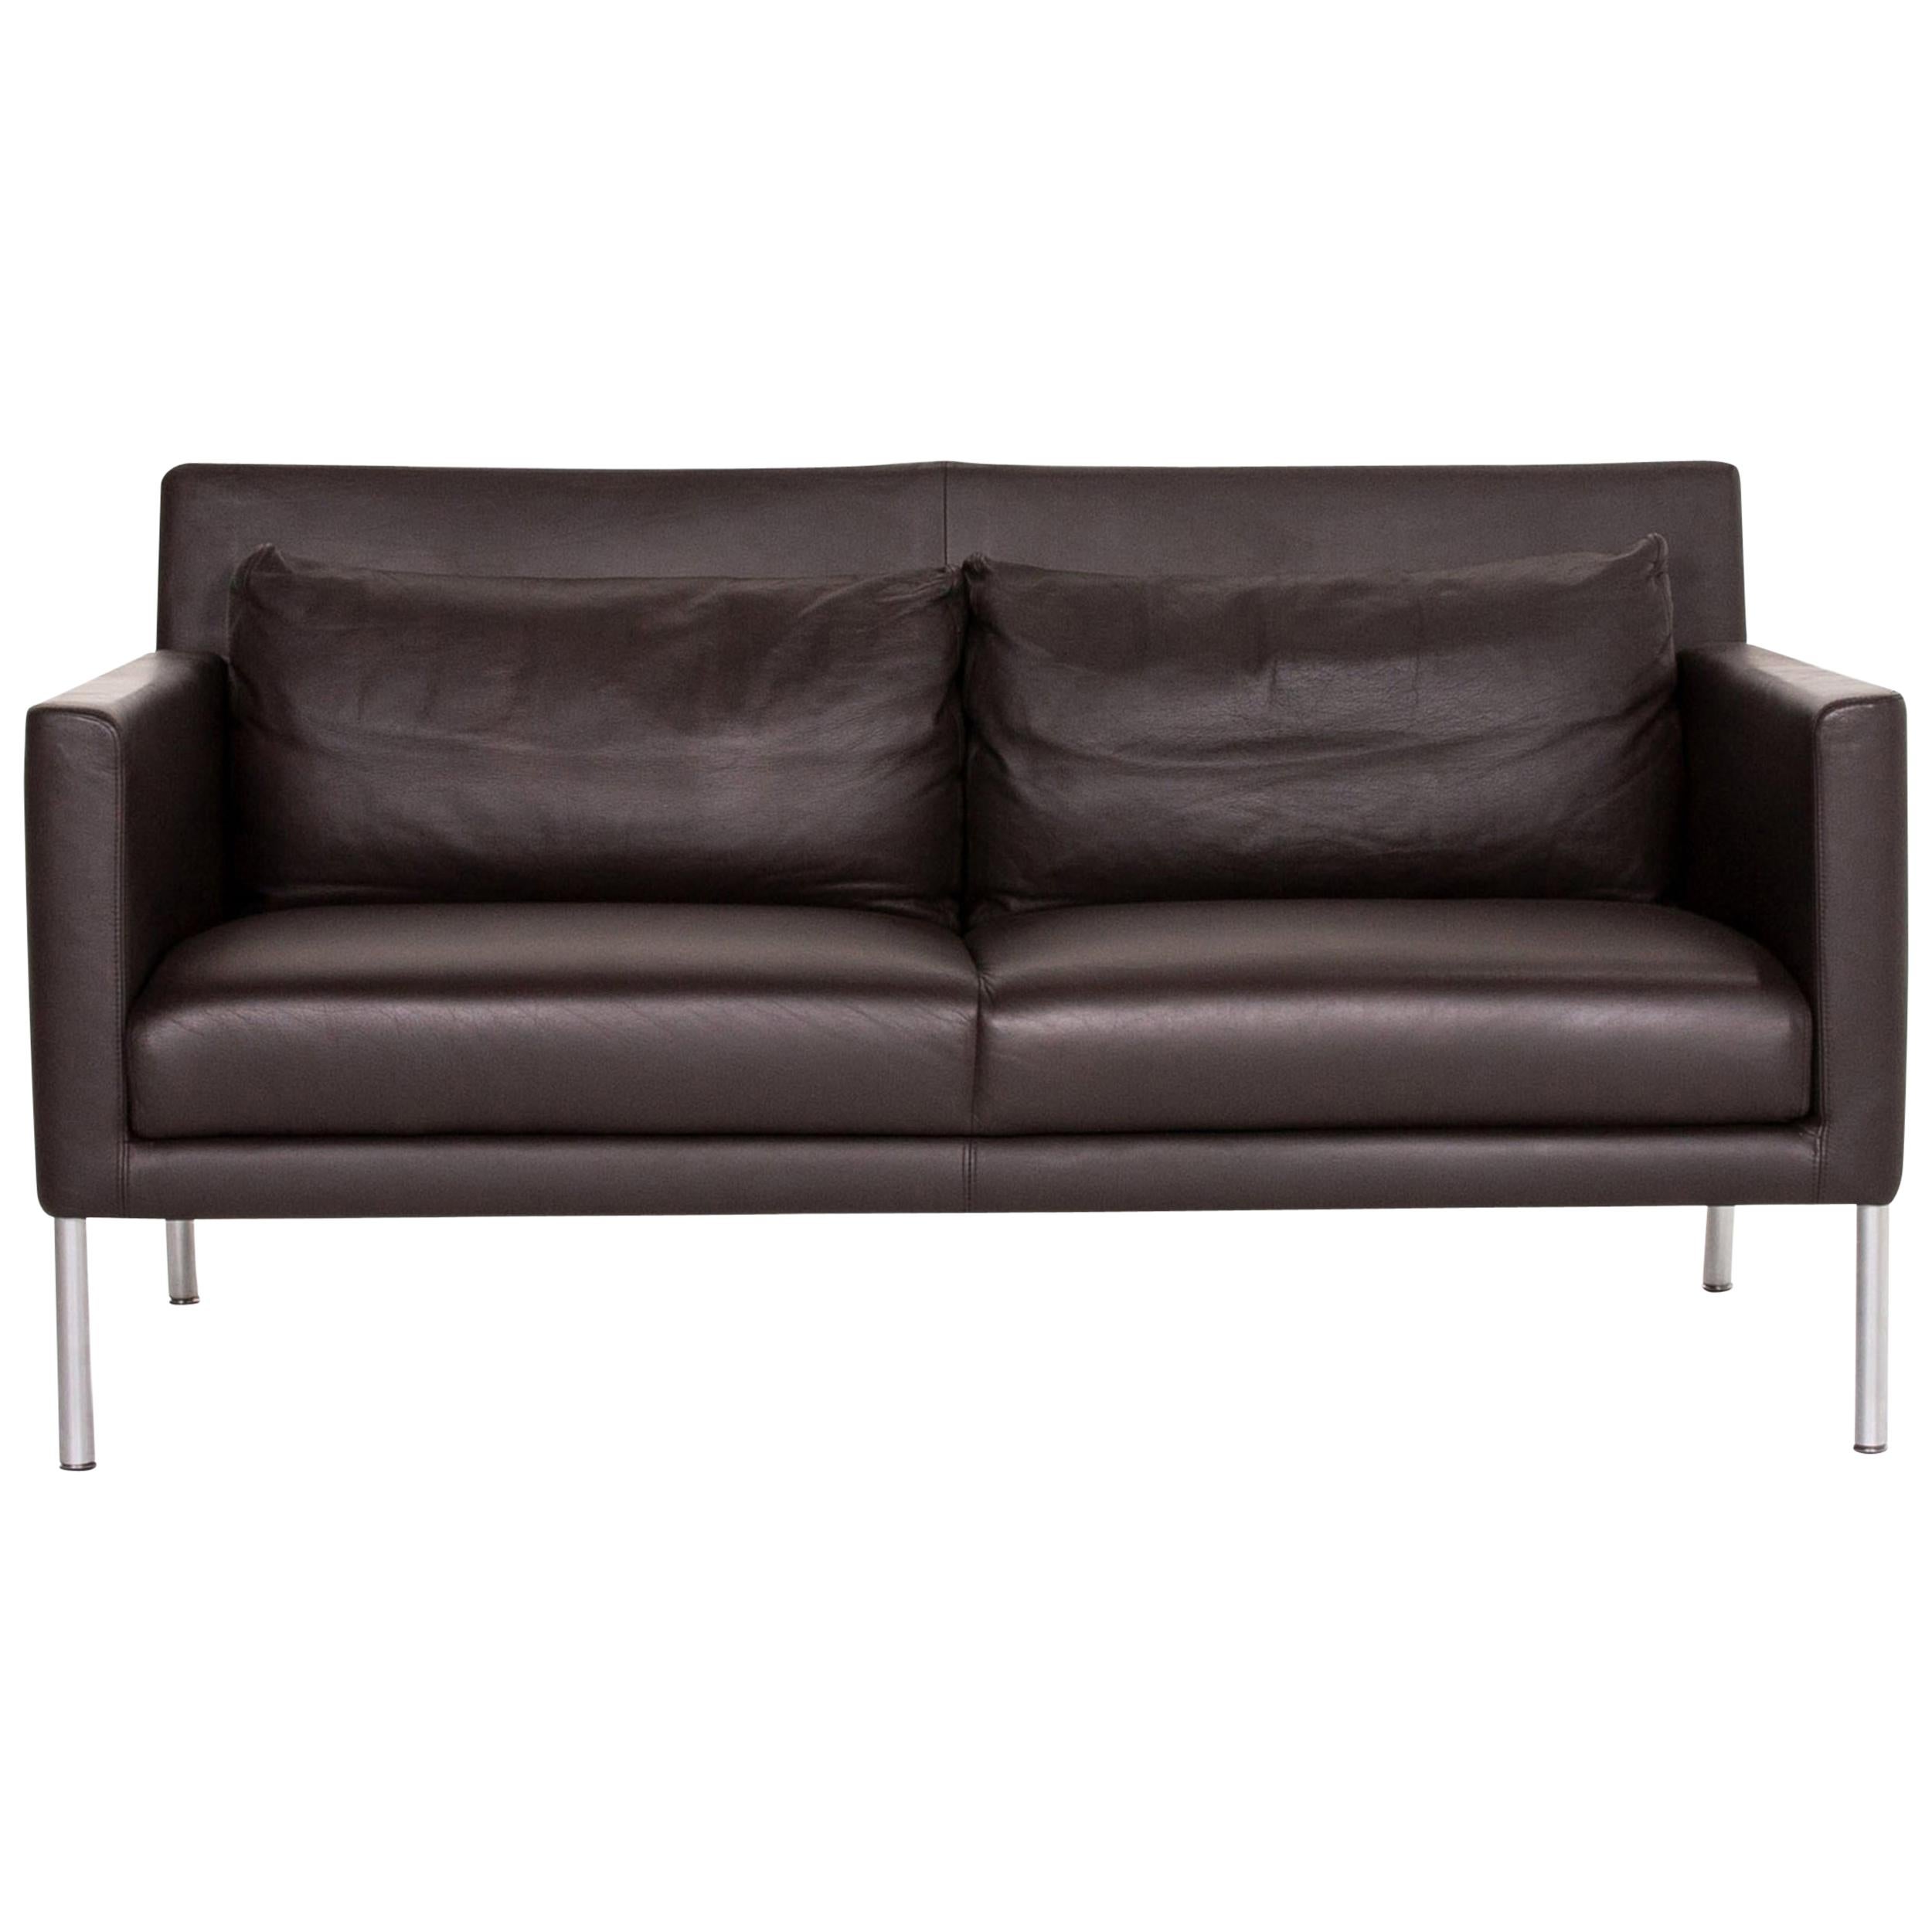 Walter Knoll Leather Sofa Brown Dark Brown Two-Seat Couch For Sale